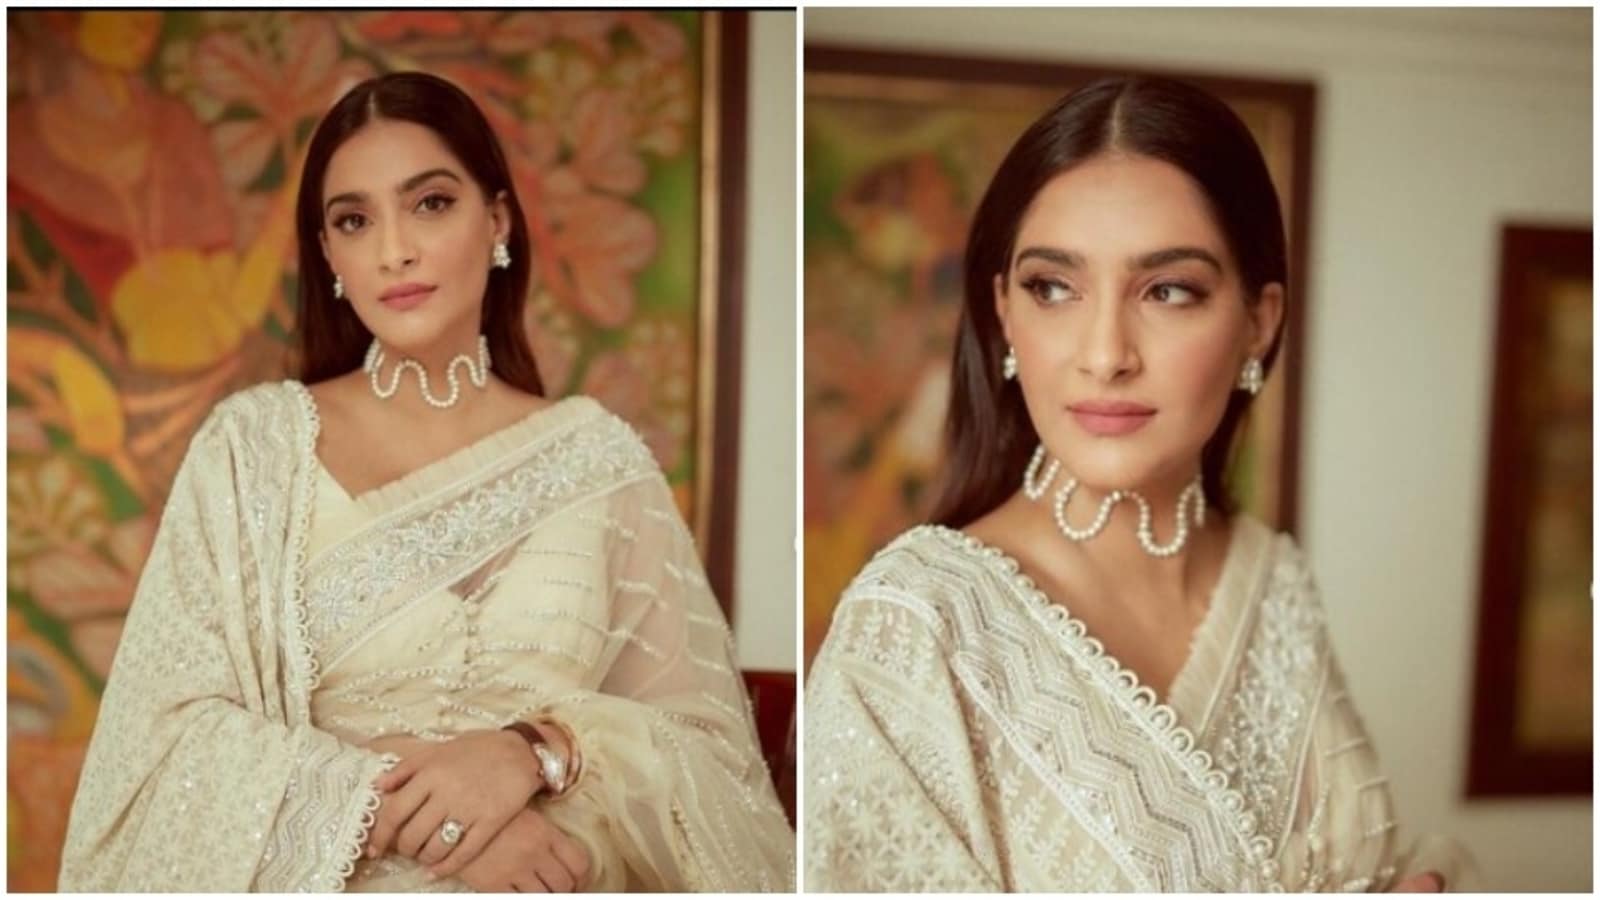 Sonam Kapoor, in a pearl white saree, redefines grace